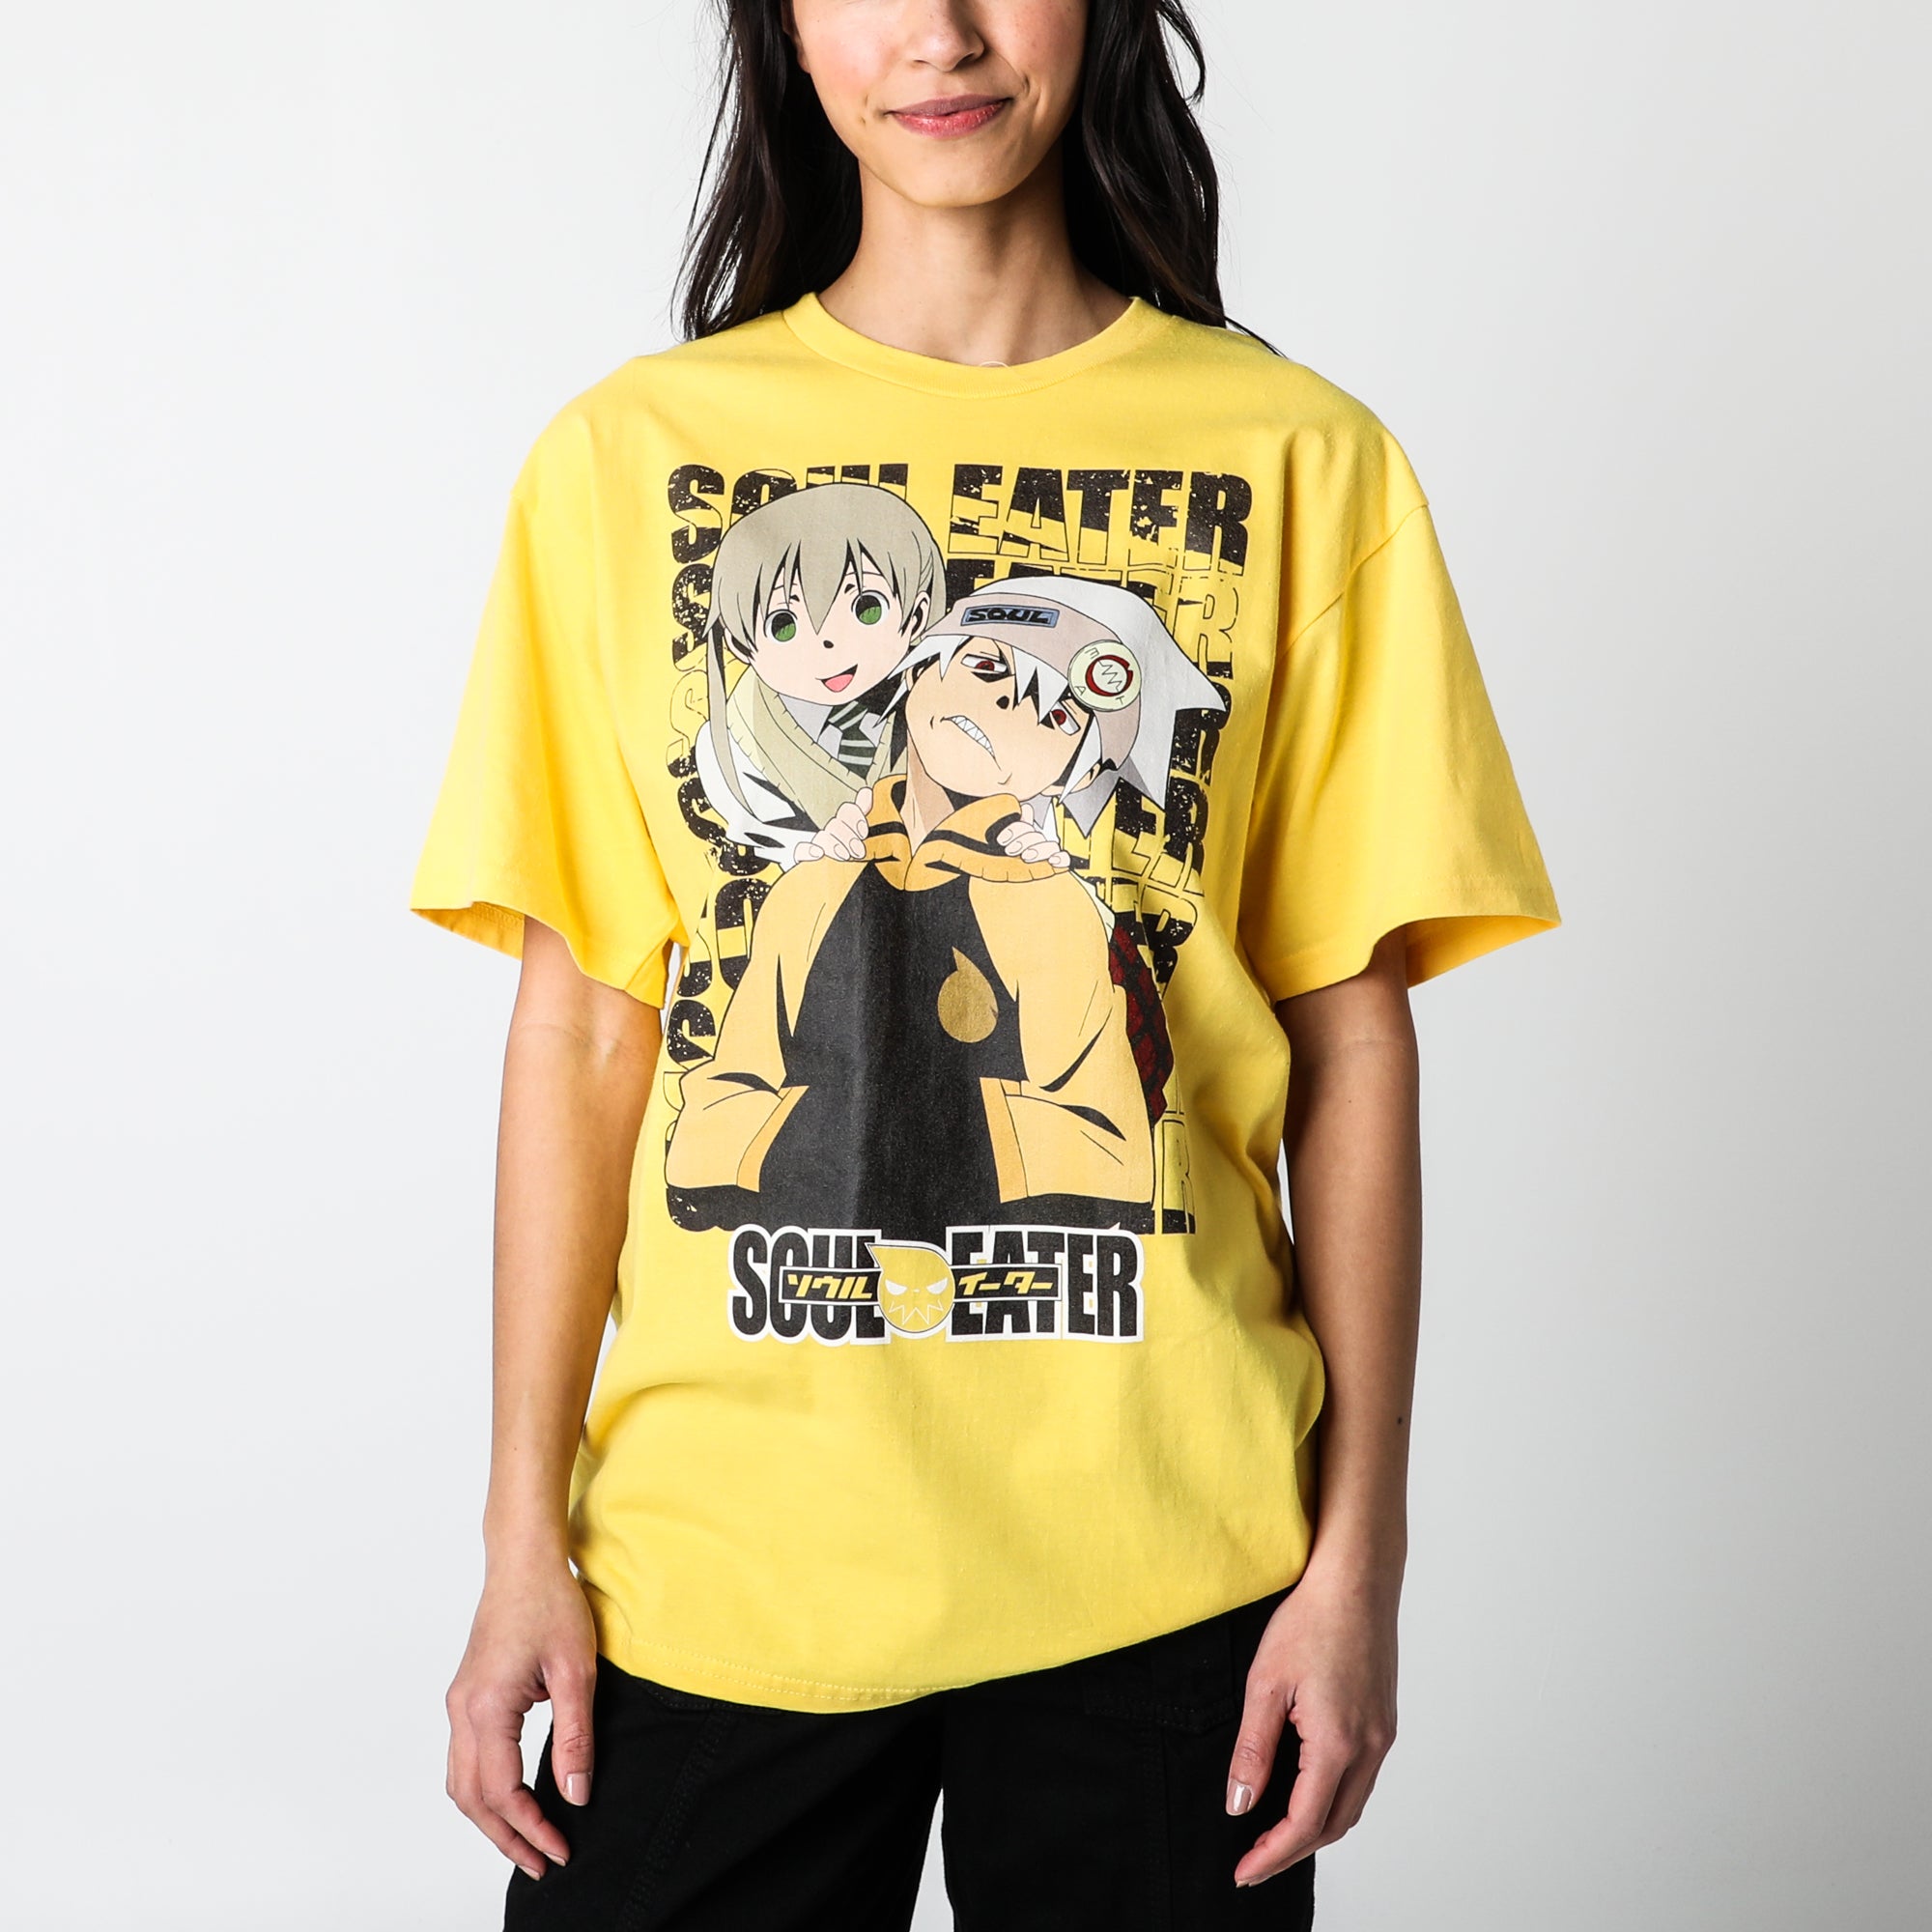 Hello people all over the world soul eater is a very good anime